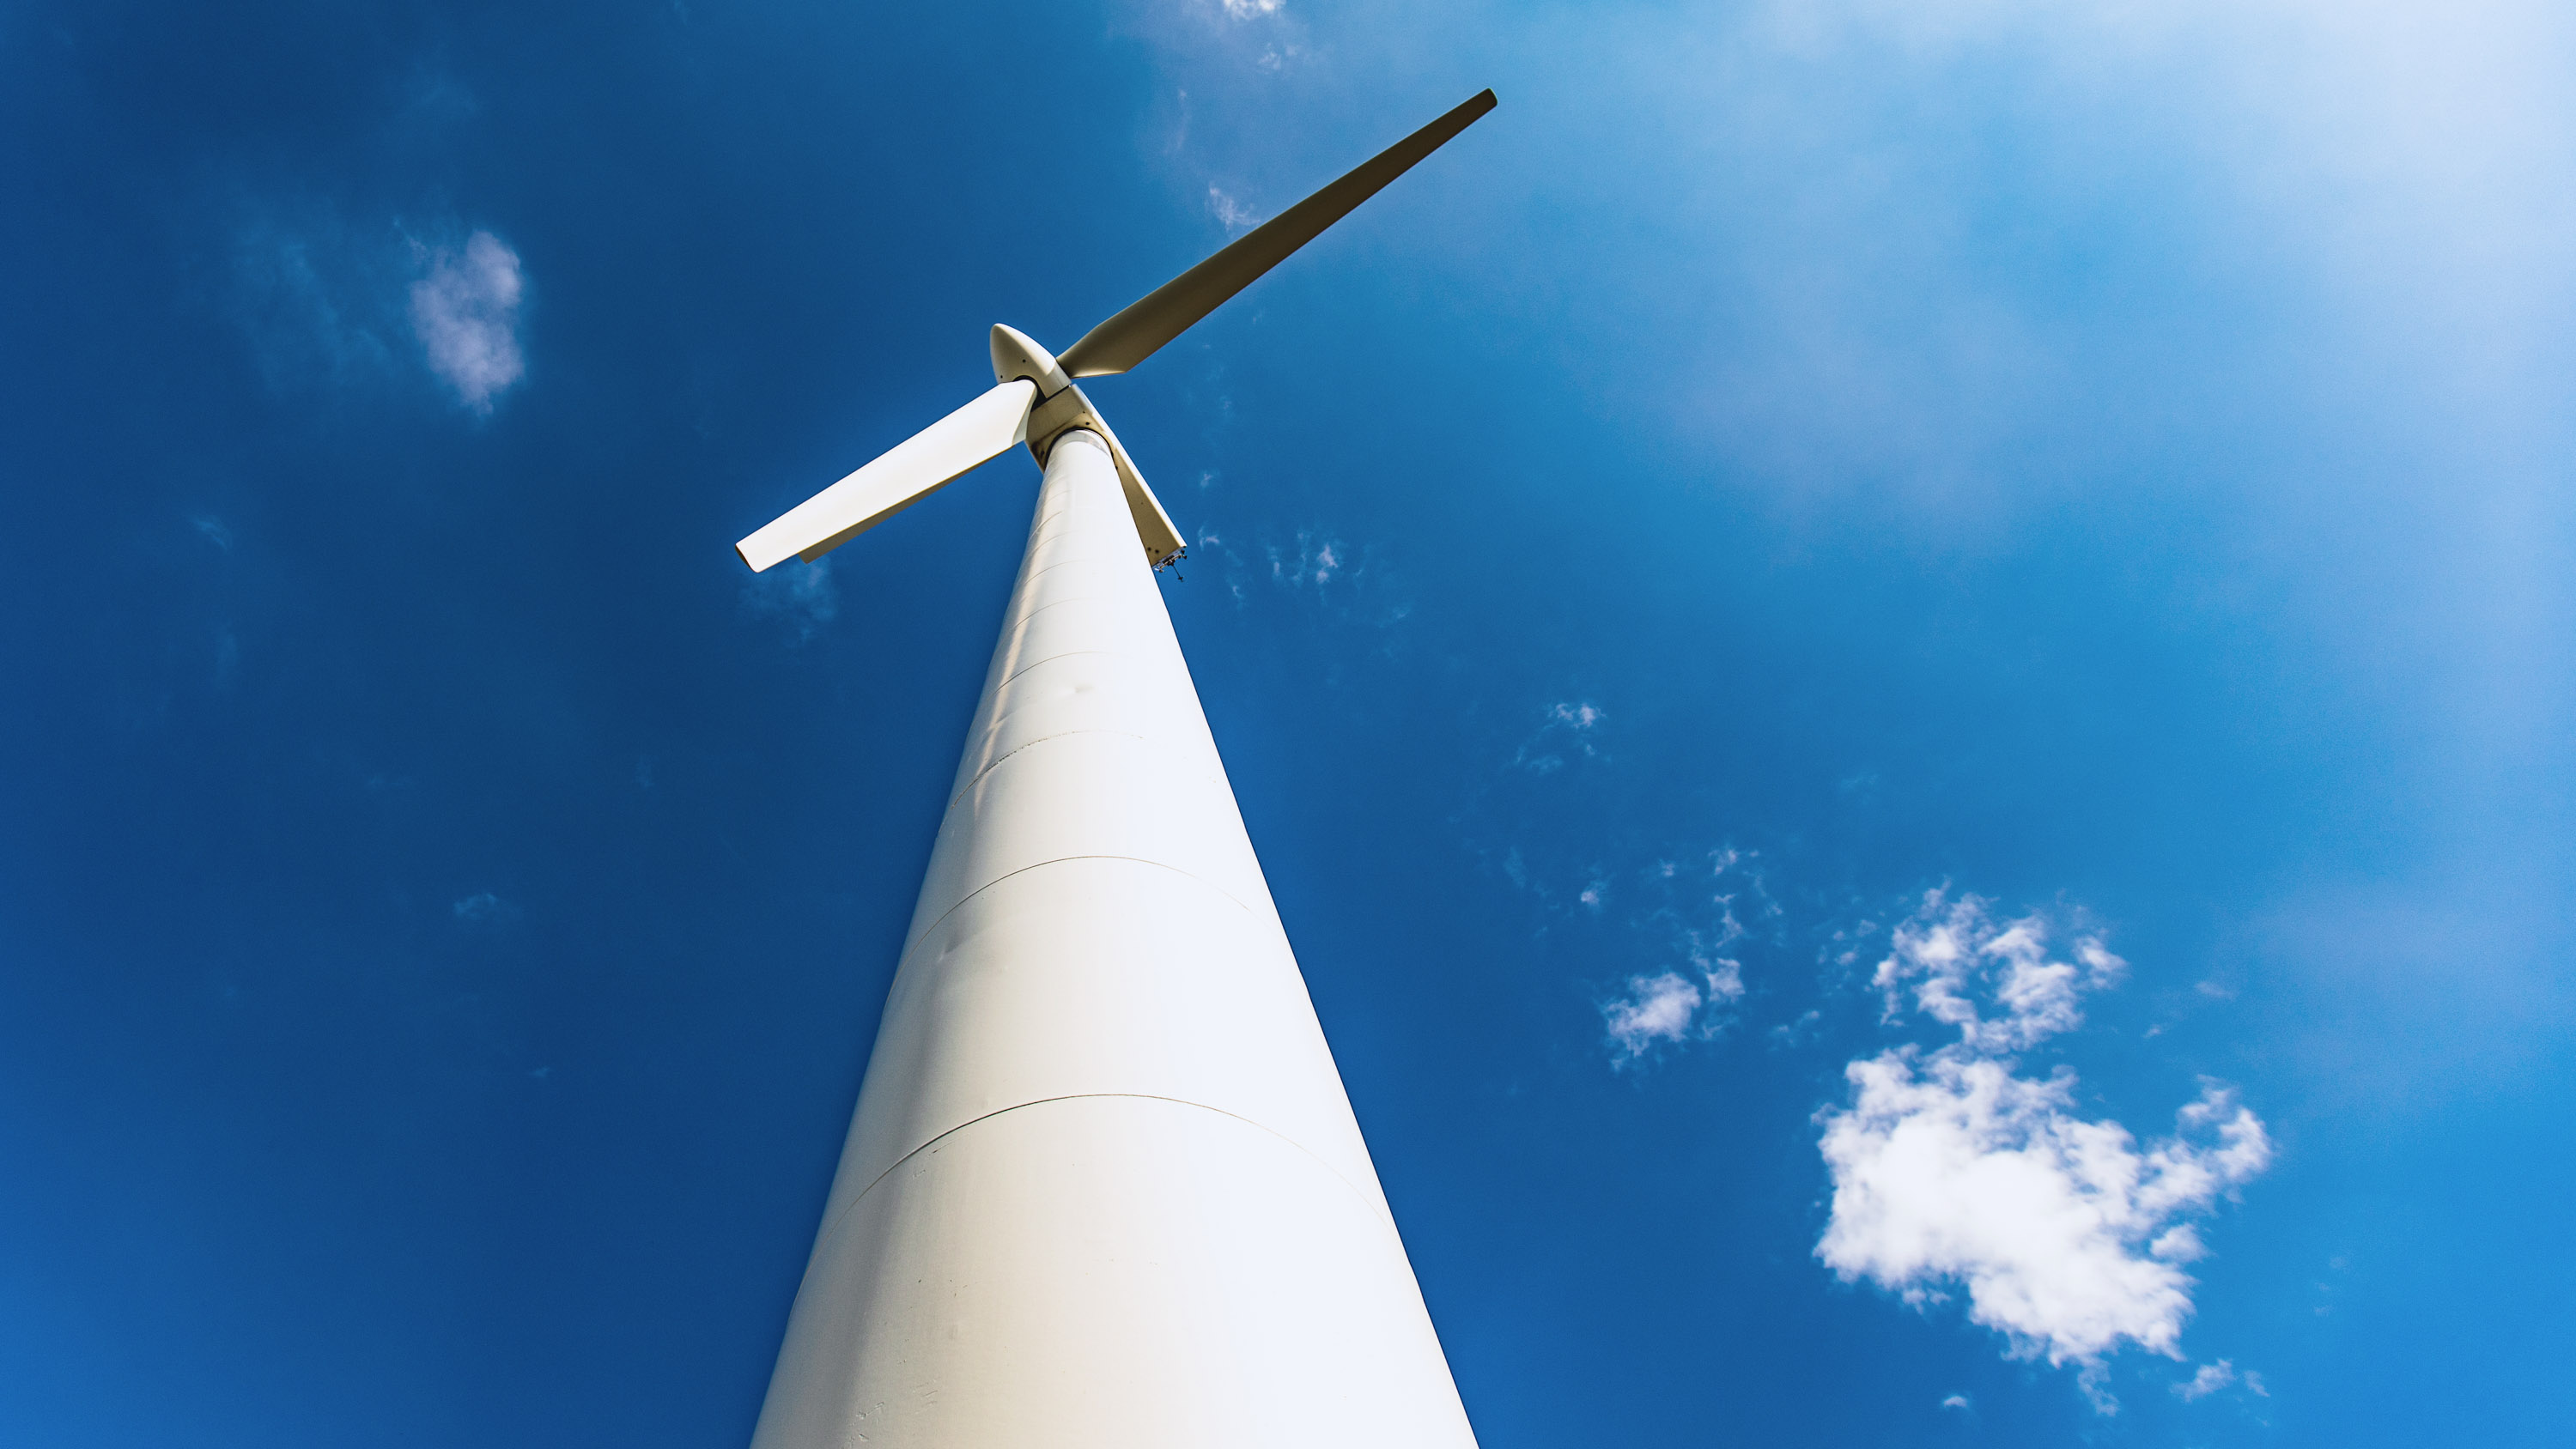 A large wind turbine seen from below set against a blue sky.